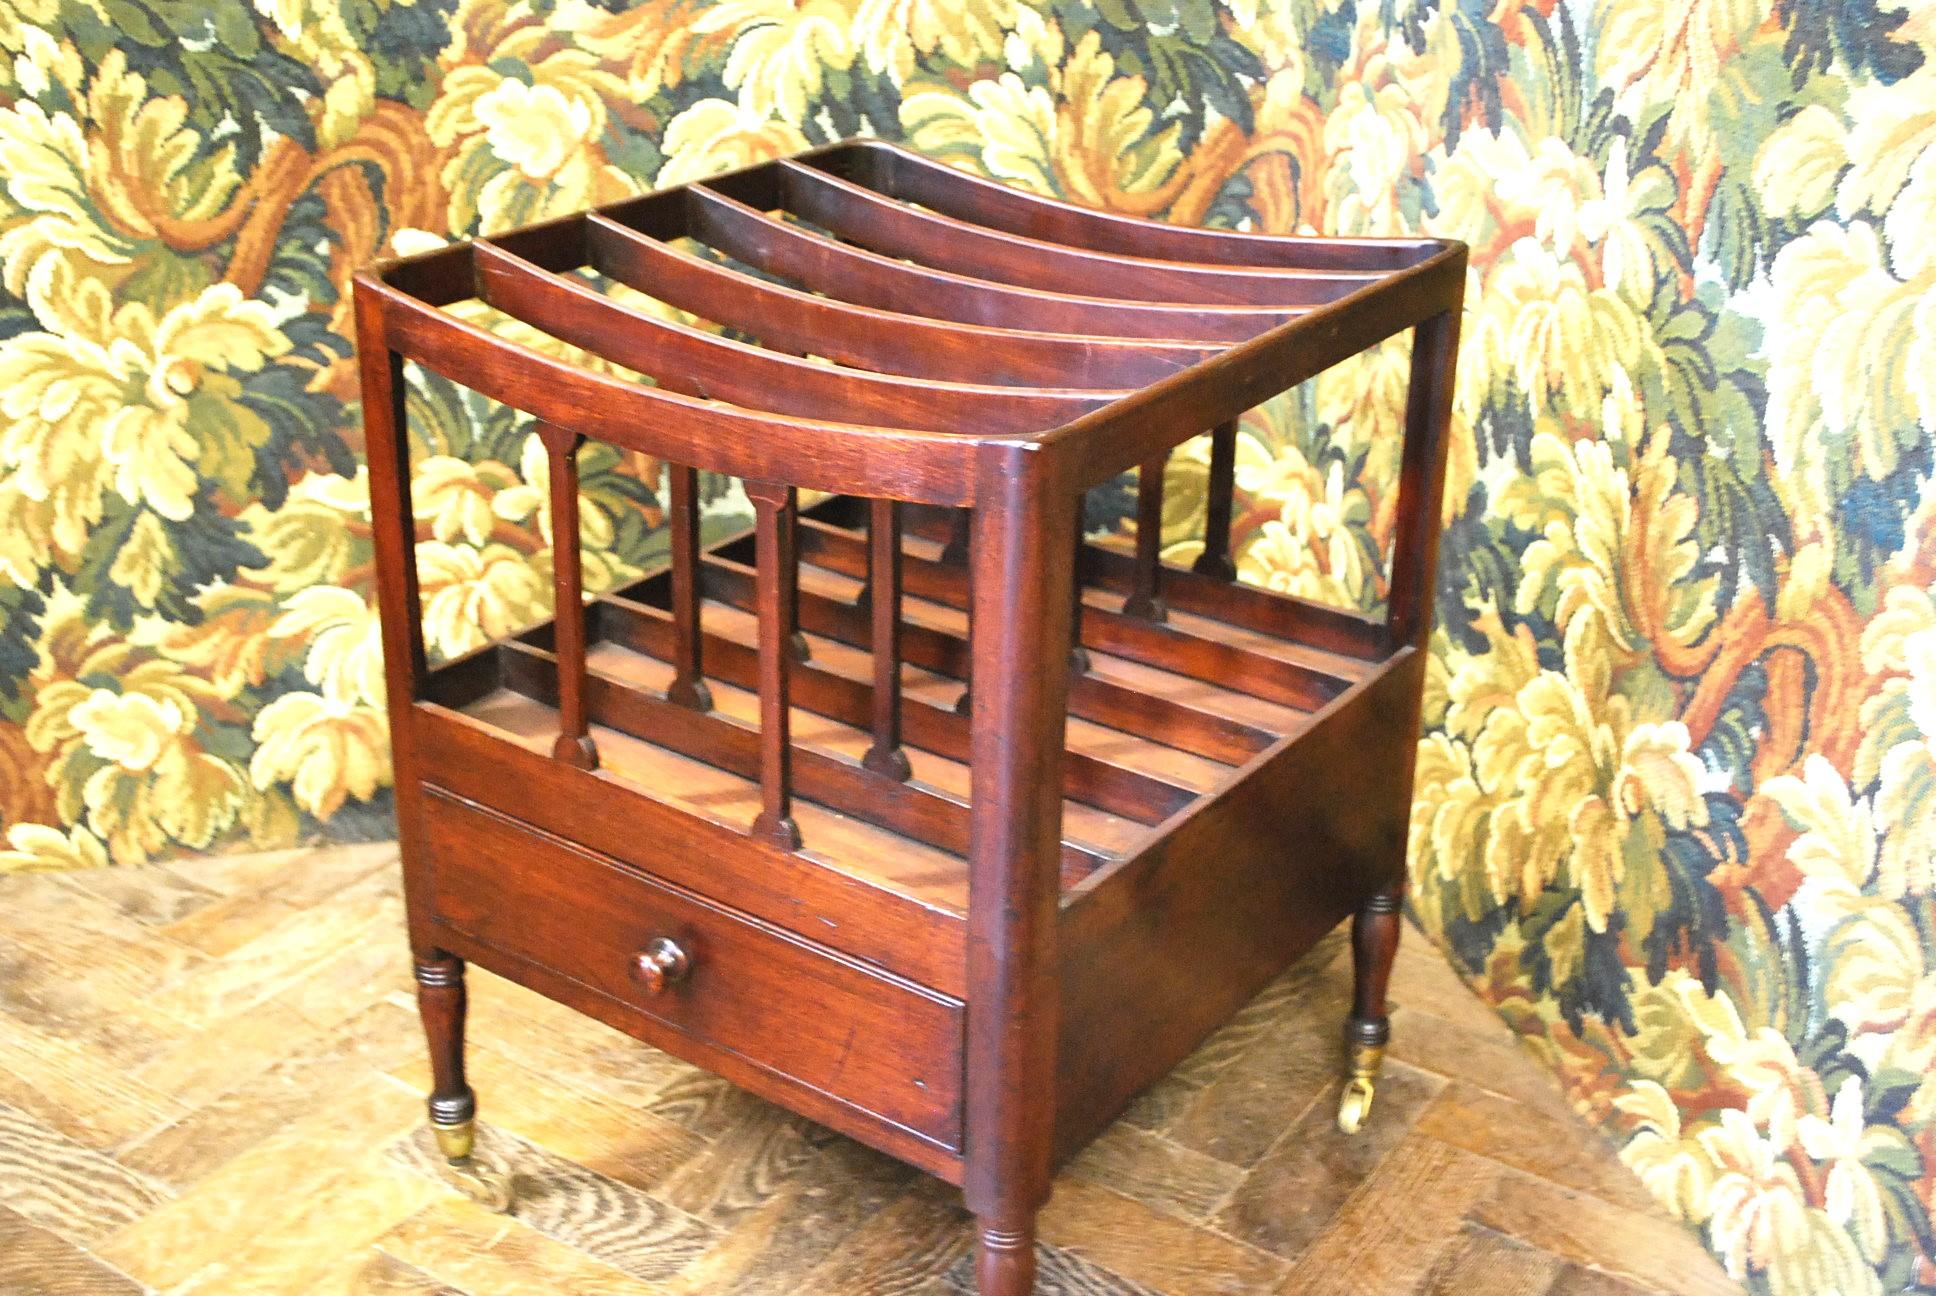 Presenting a truly unique find from the 18th Century Georgian era, we are delighted to introduce this exceptional Antique Mahogany Canterbury/Magazine Rack. What sets this piece apart is its uncommon extra division, lending it an intriguing country